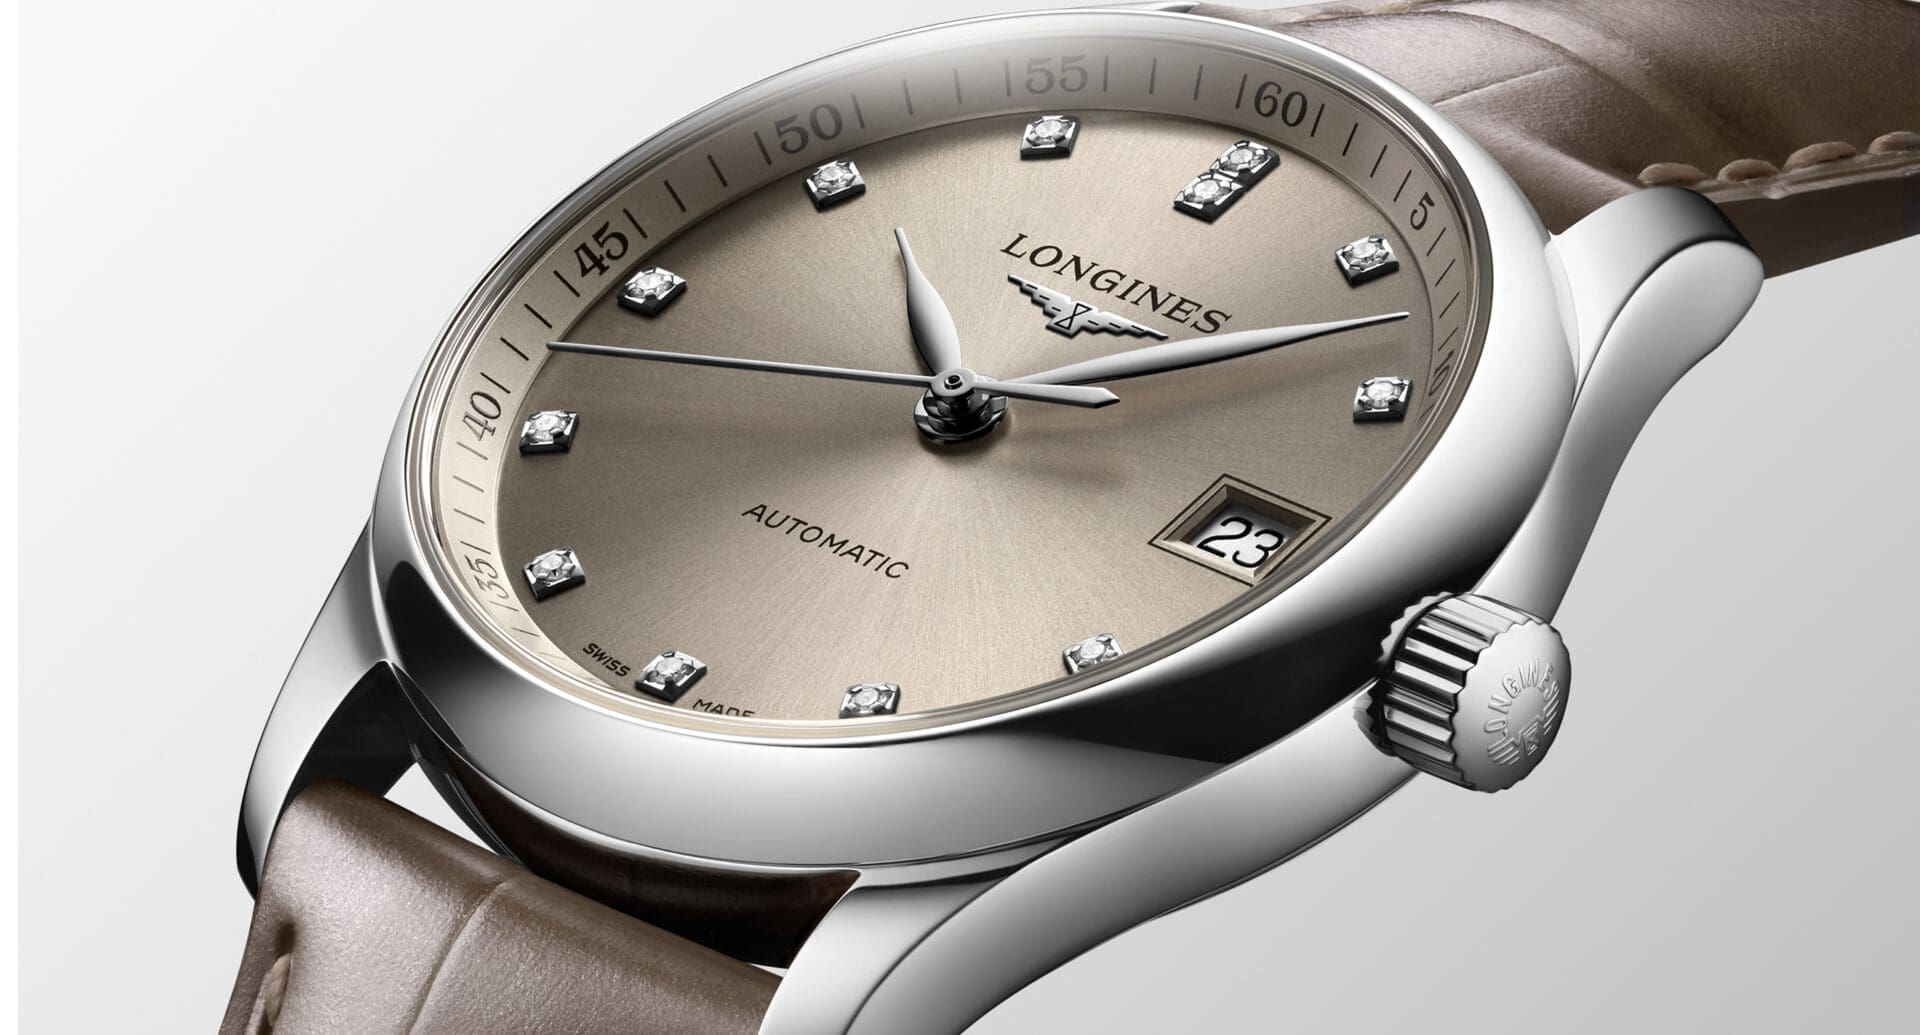 INTRODUCING: The new Longines Master Collection in 34mm